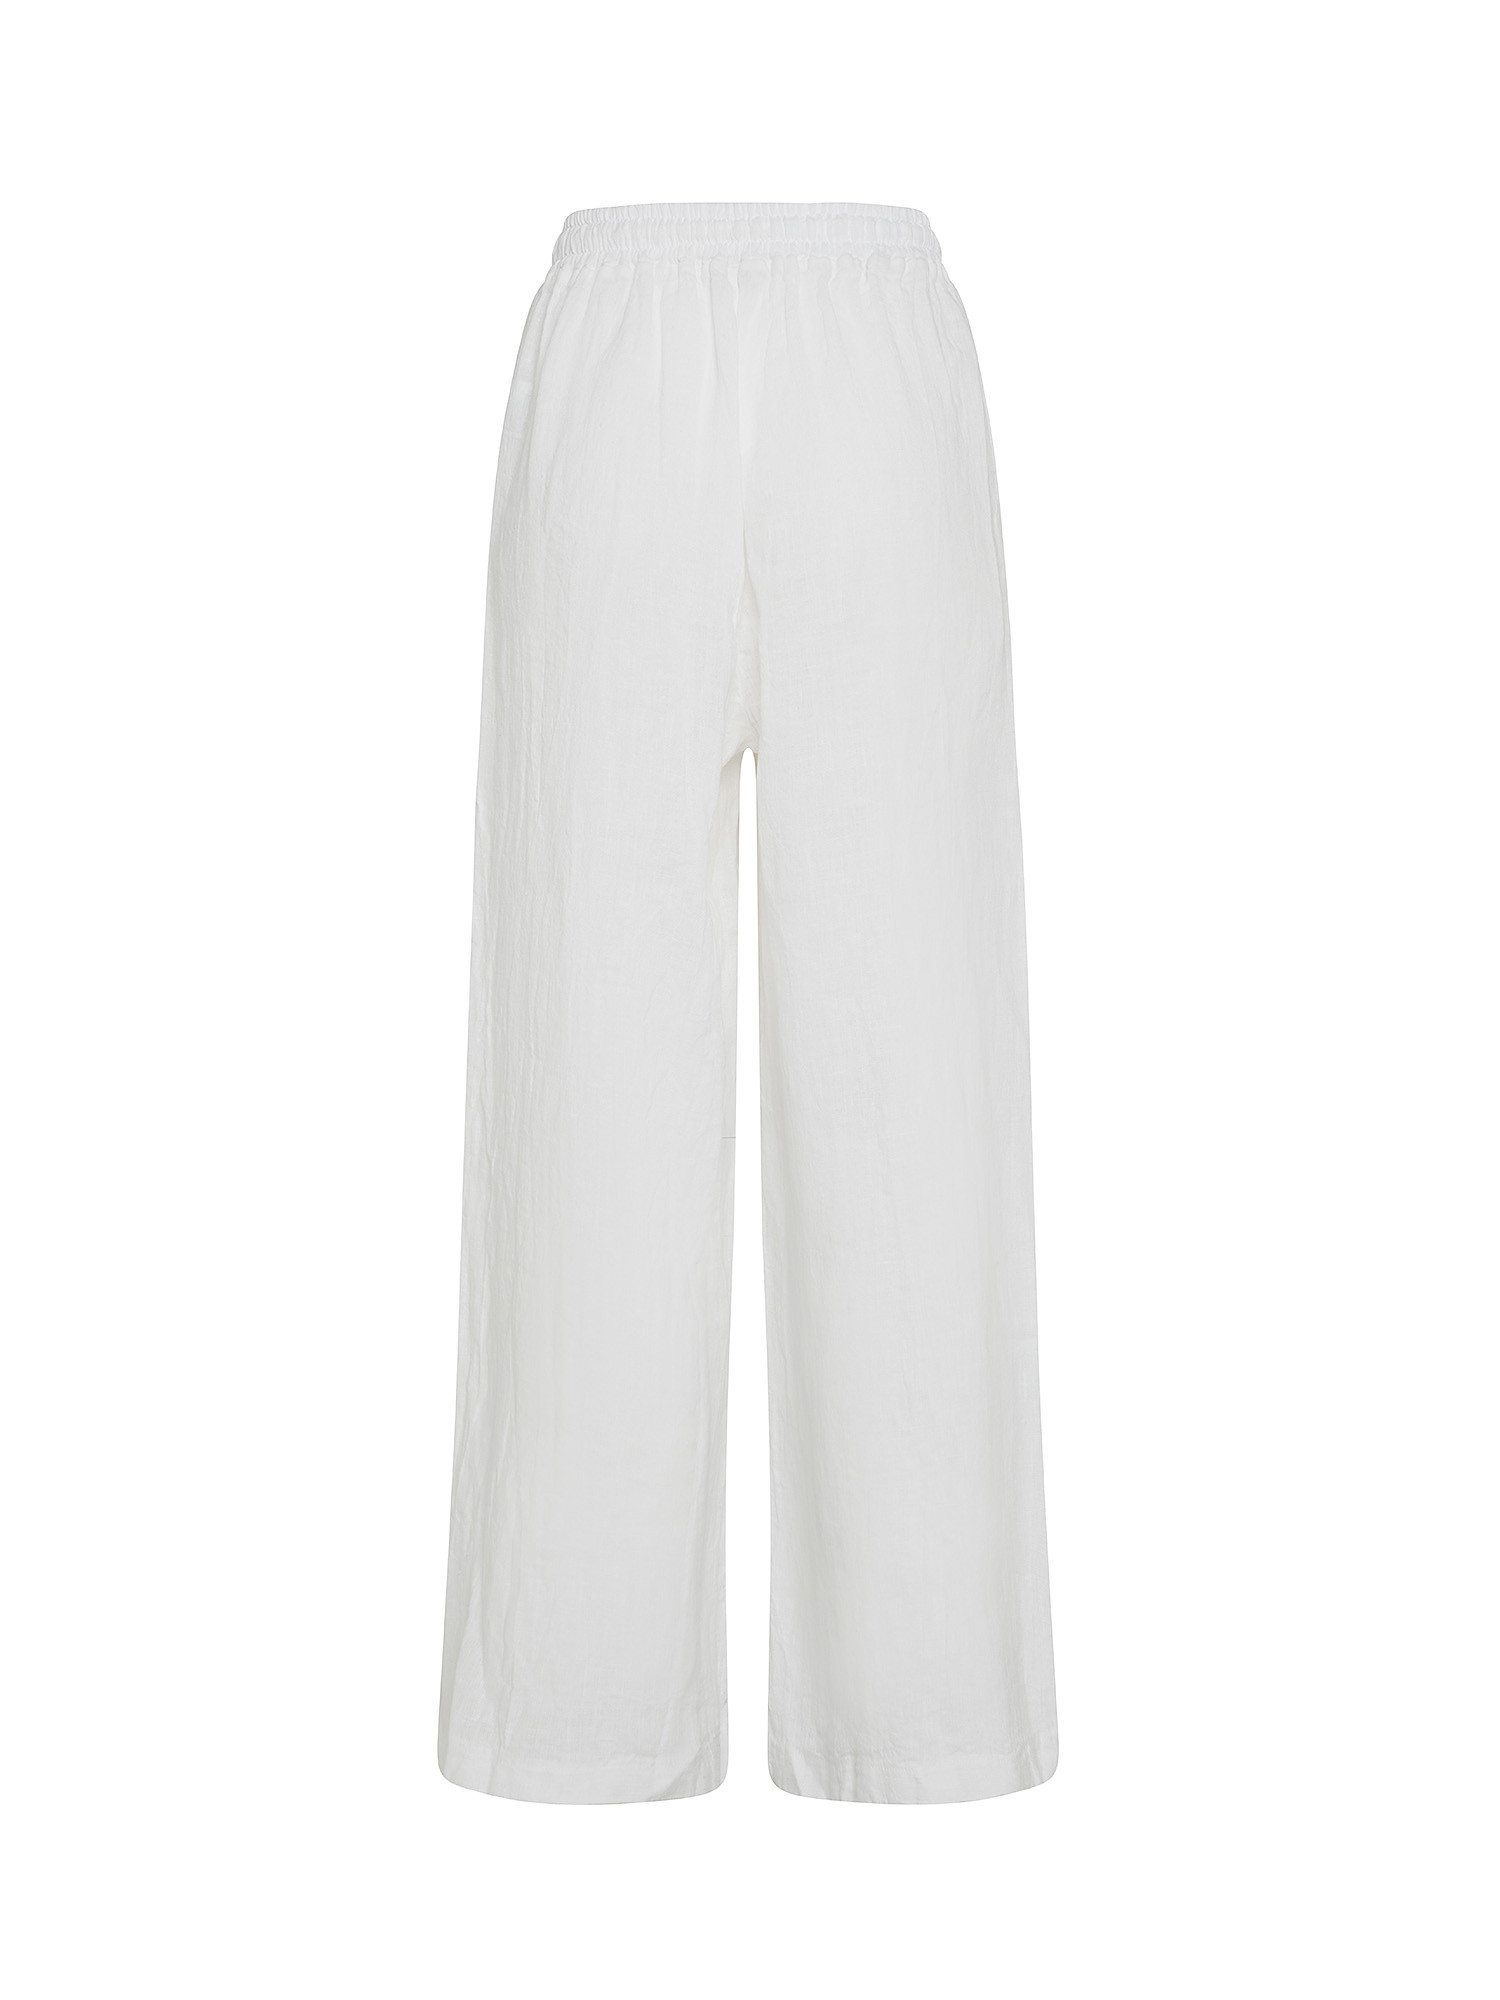 Solid color 100% linen trousers, White, large image number 1